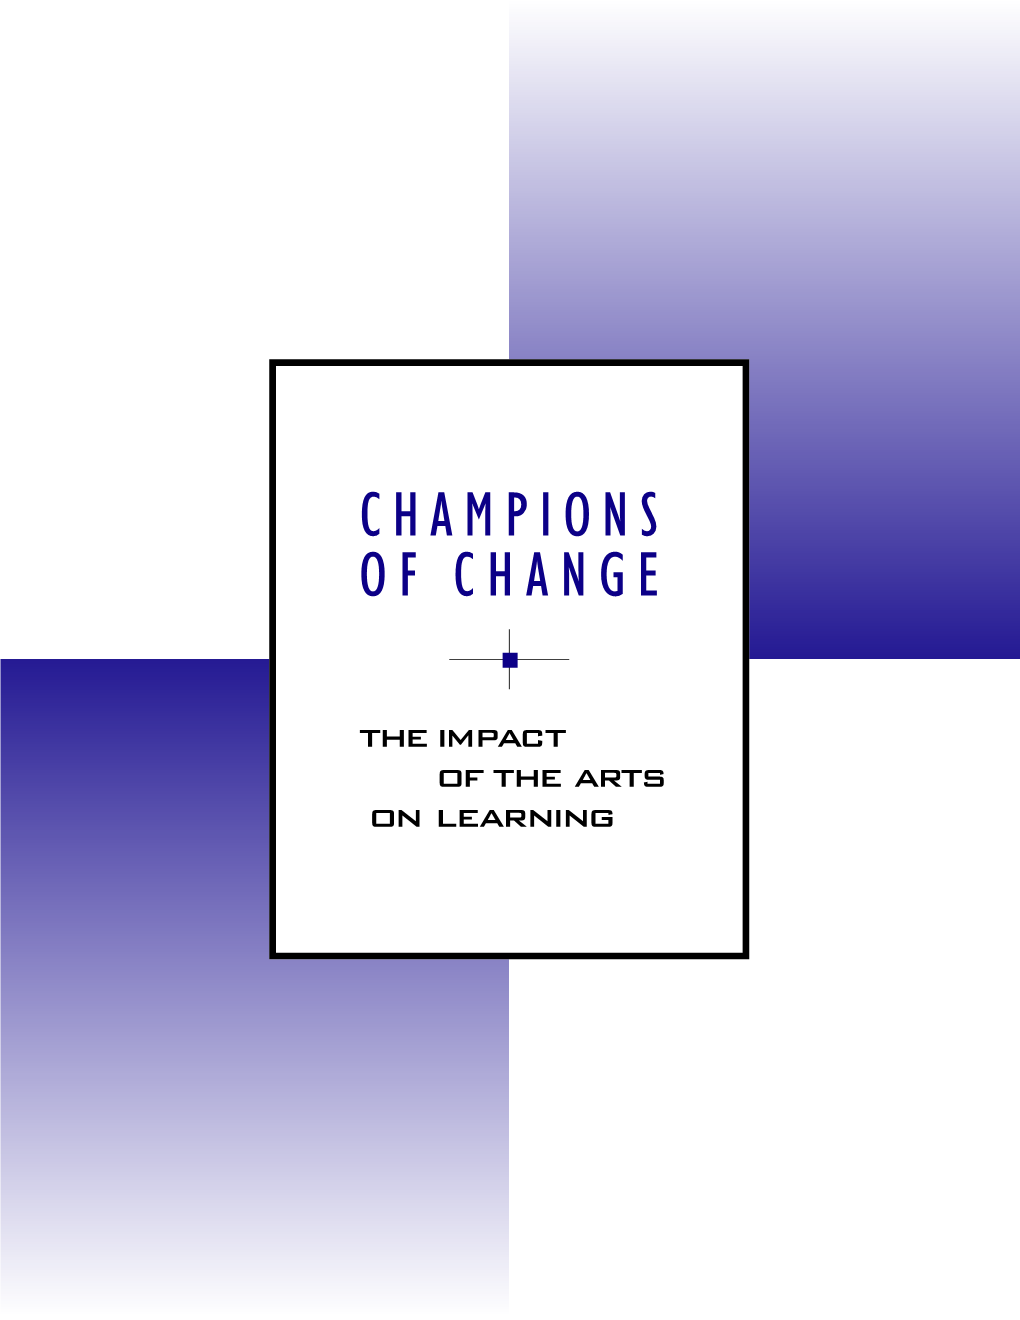 Champions of Change: the Impact of the Arts on Learning Provides New and Important Findings on Actual Learning Experiences Involving the Arts